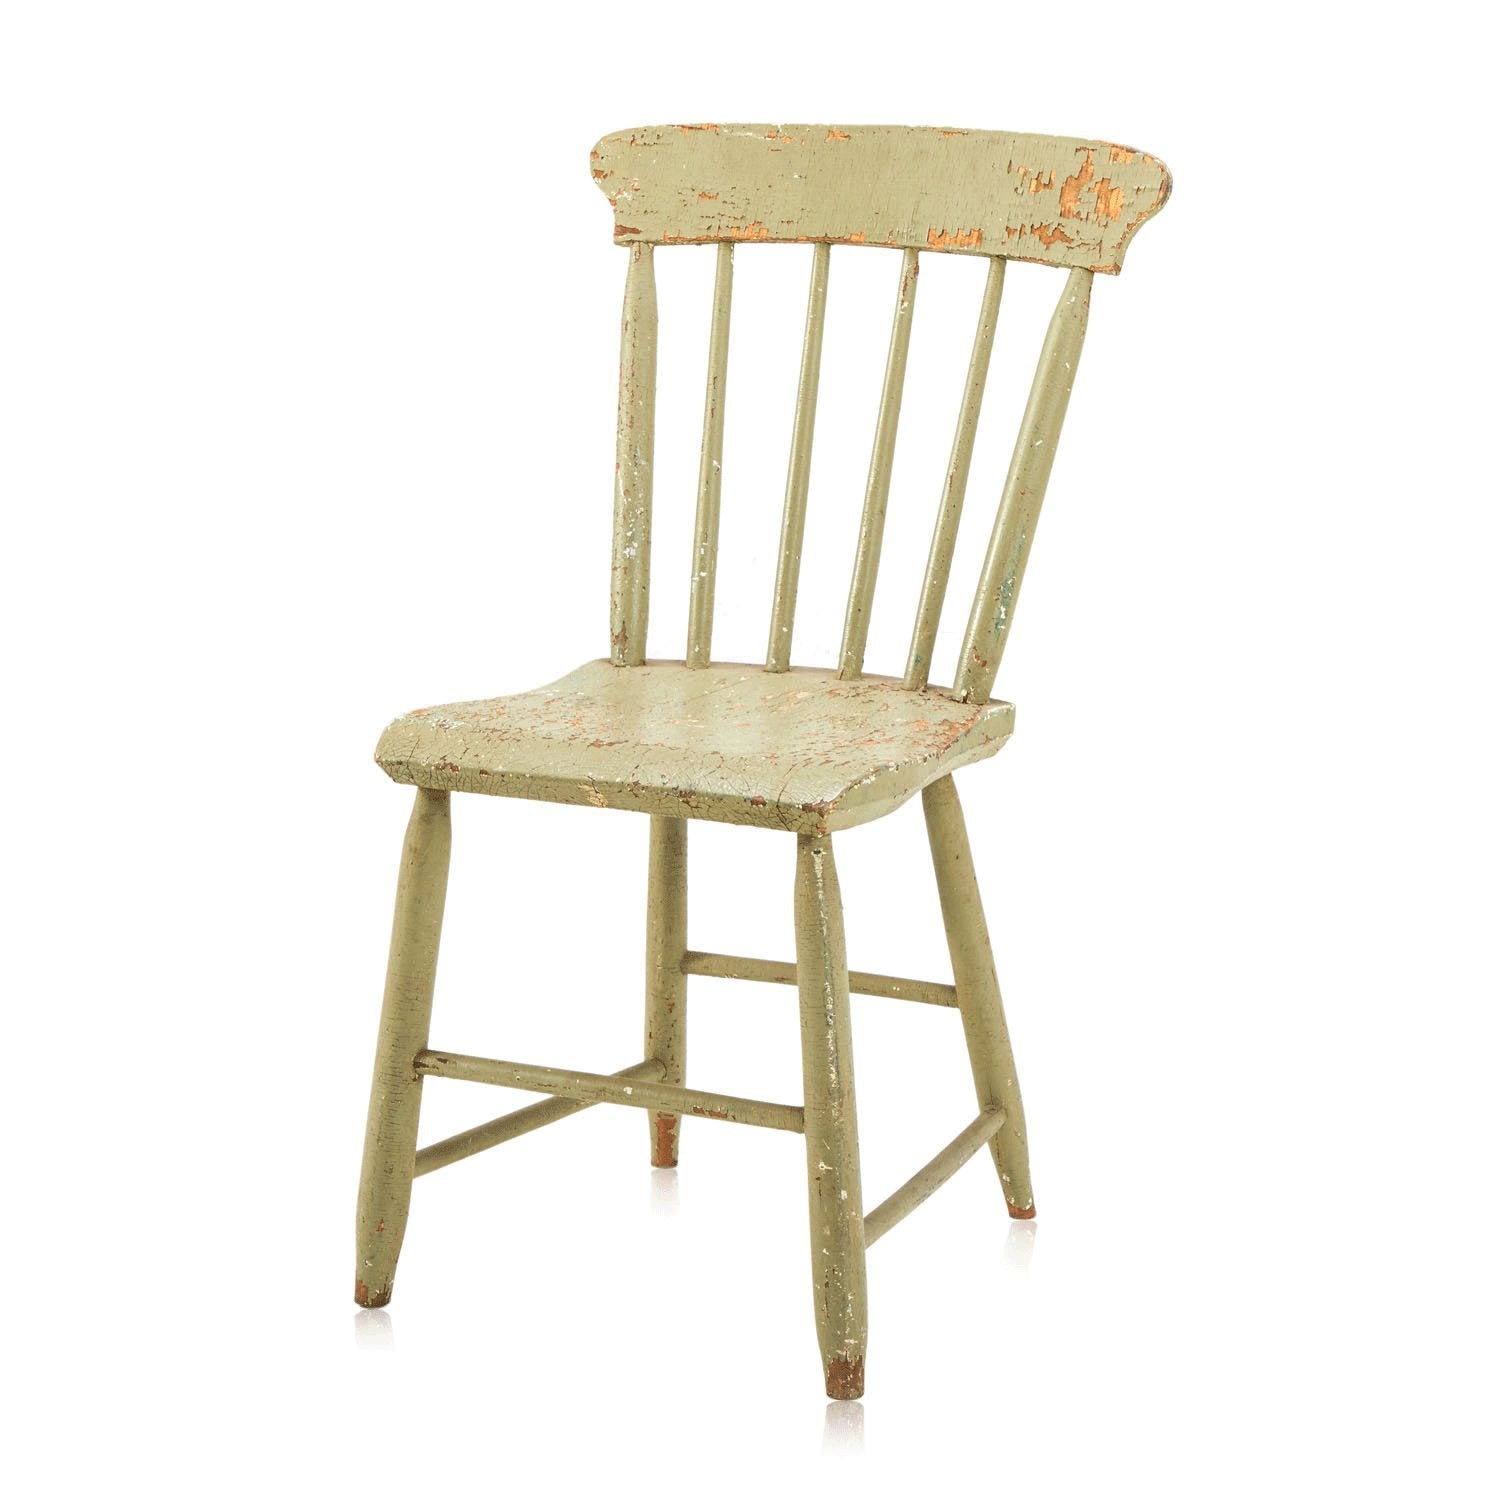 Rustic Farmhouse Dining Chairs / Chester 18 Inch Rustic Farmhouse